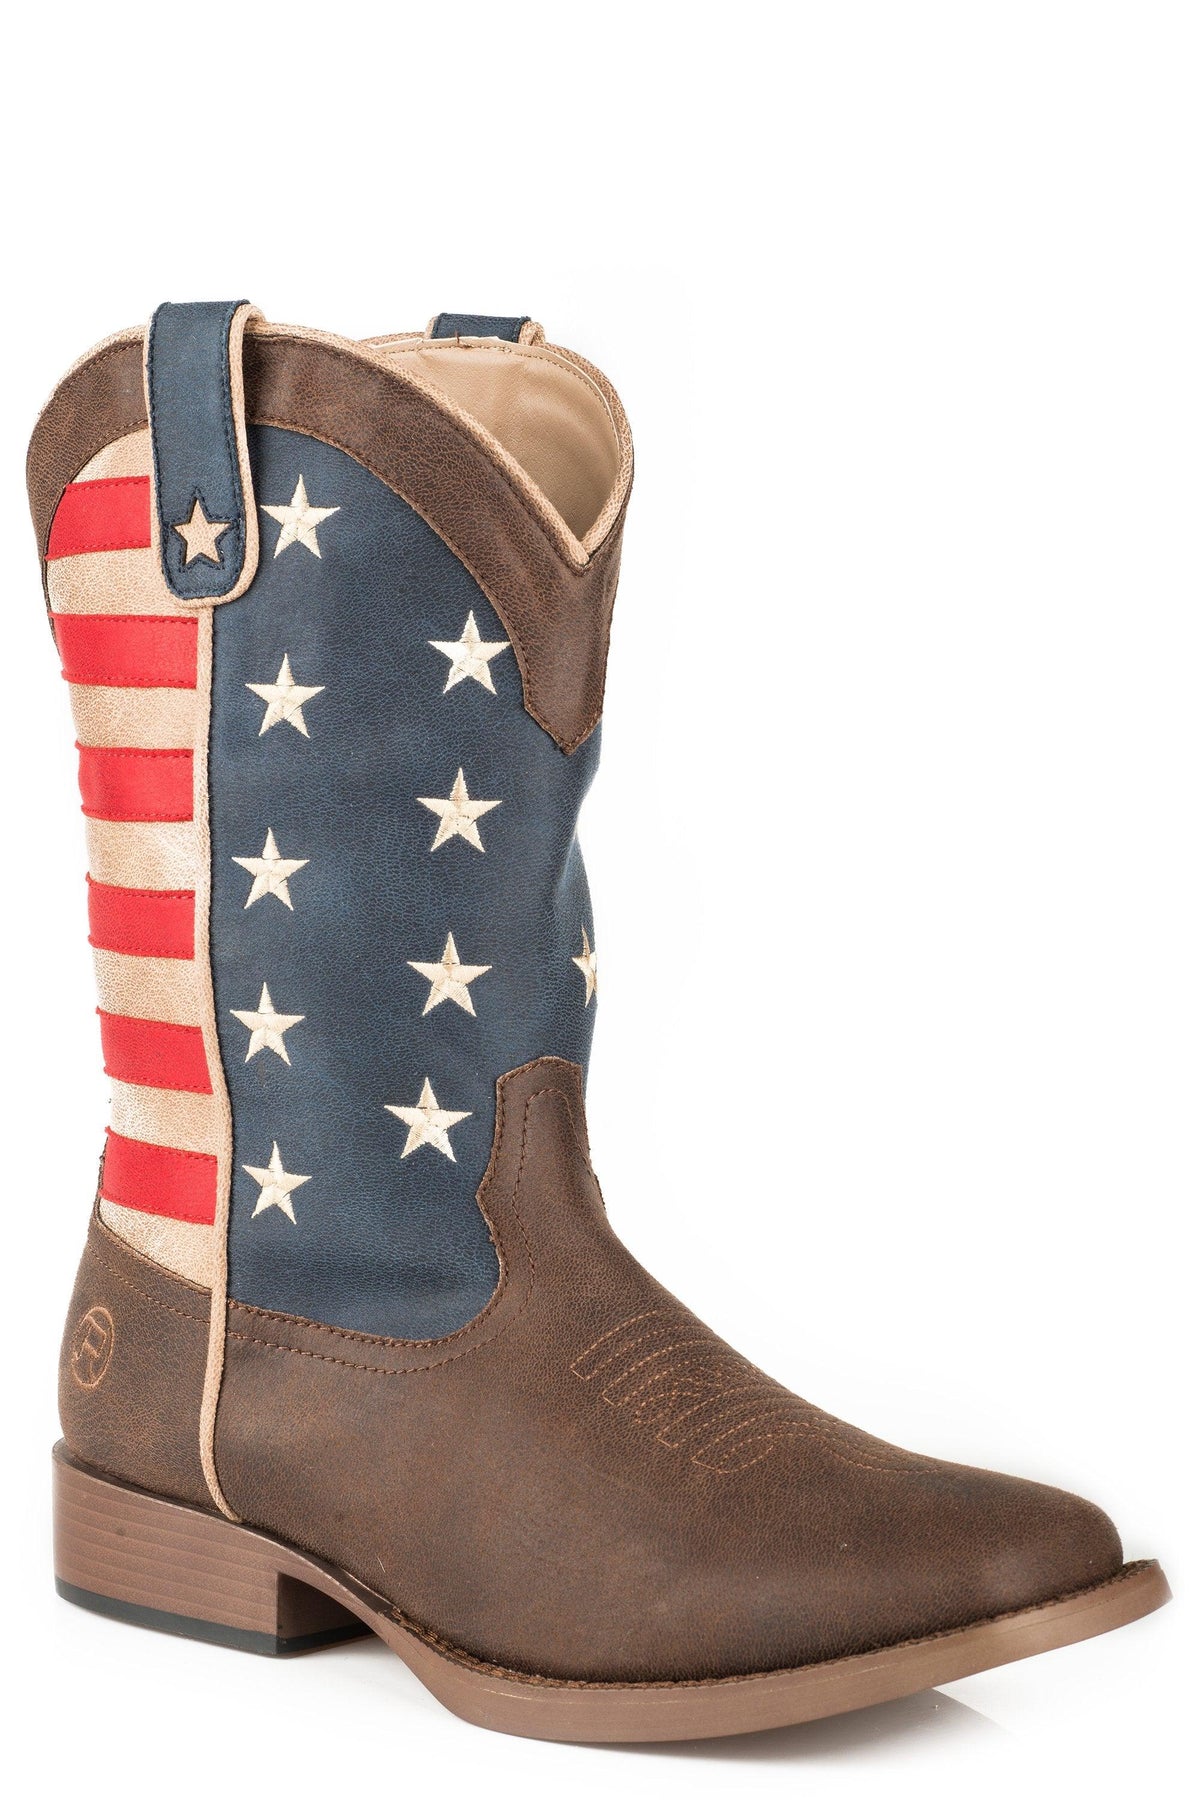 ROPER WOMENS COWBOY BOOT VINTAGE BROWN FAUX LEATHER WITH AMERICAN FLAG UPPER - Flyclothing LLC